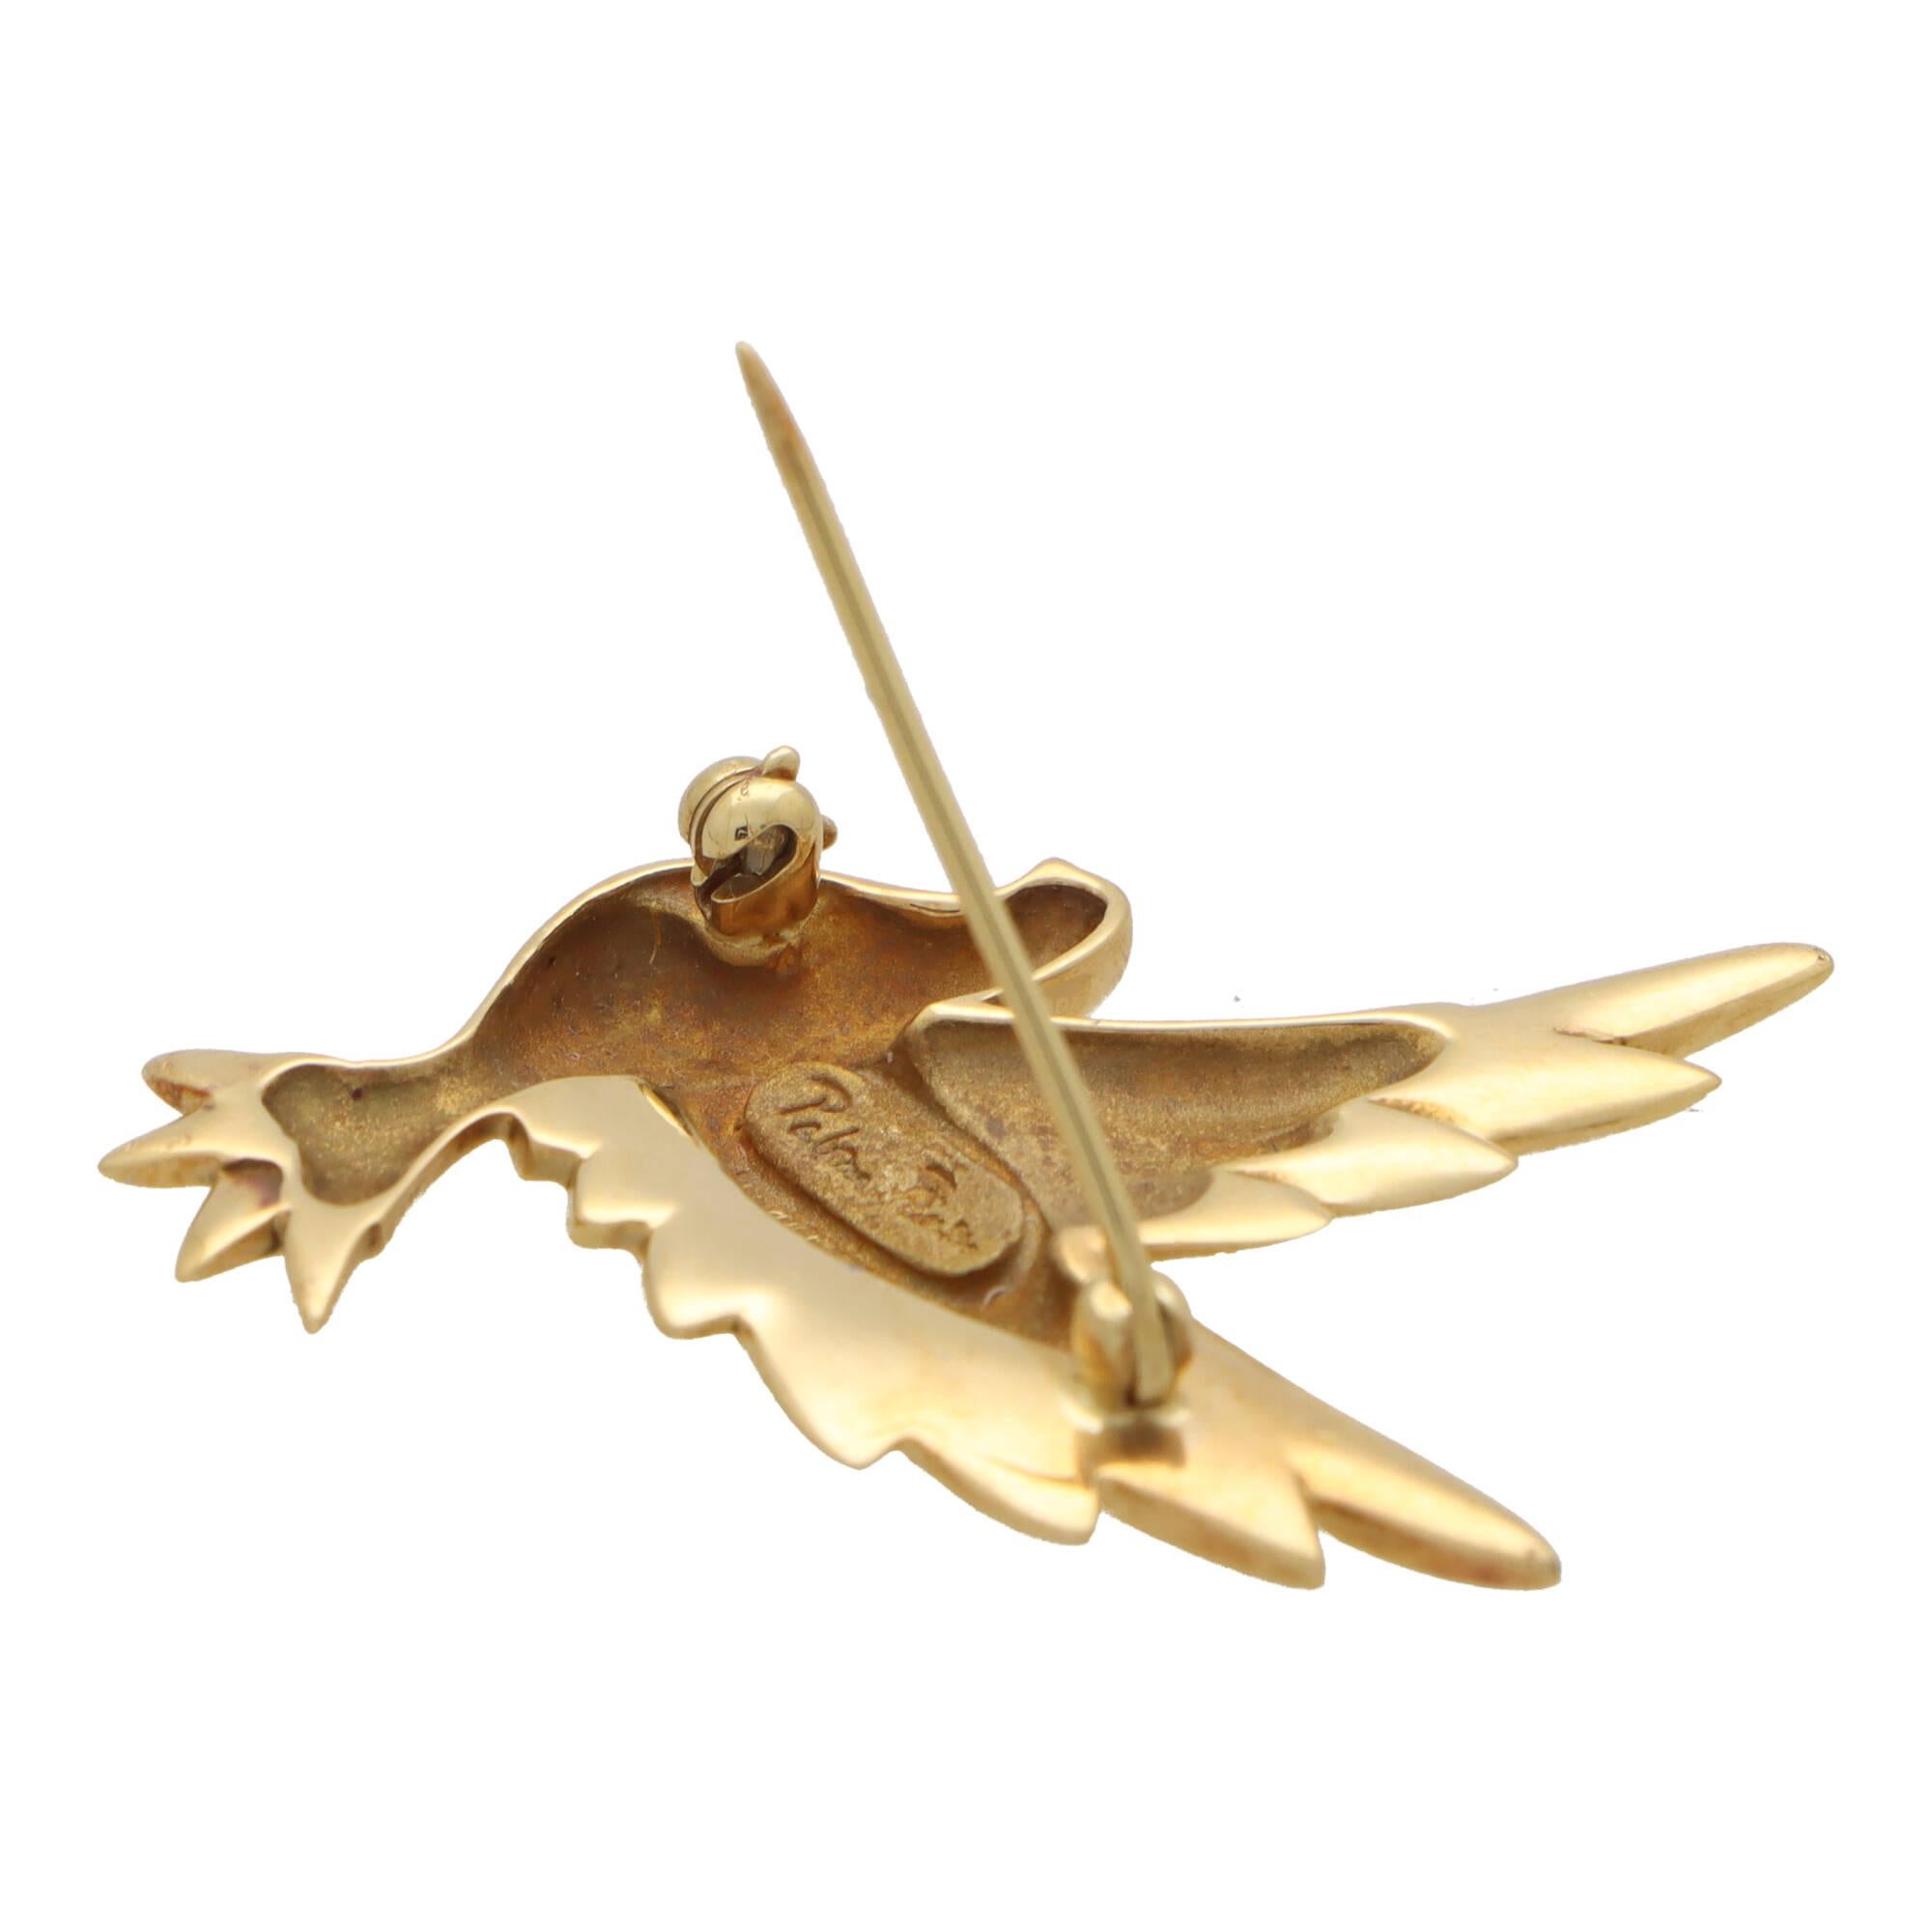 A beautiful vintage Paloma Picasso for Tiffany & Co. dove brooch set in 18k yellow gold.

The brooch is composed of a flying dove motif, made of polished 18k yellow gold. It is secured to reverse with a long pin roller clasp fitting.

Due to the